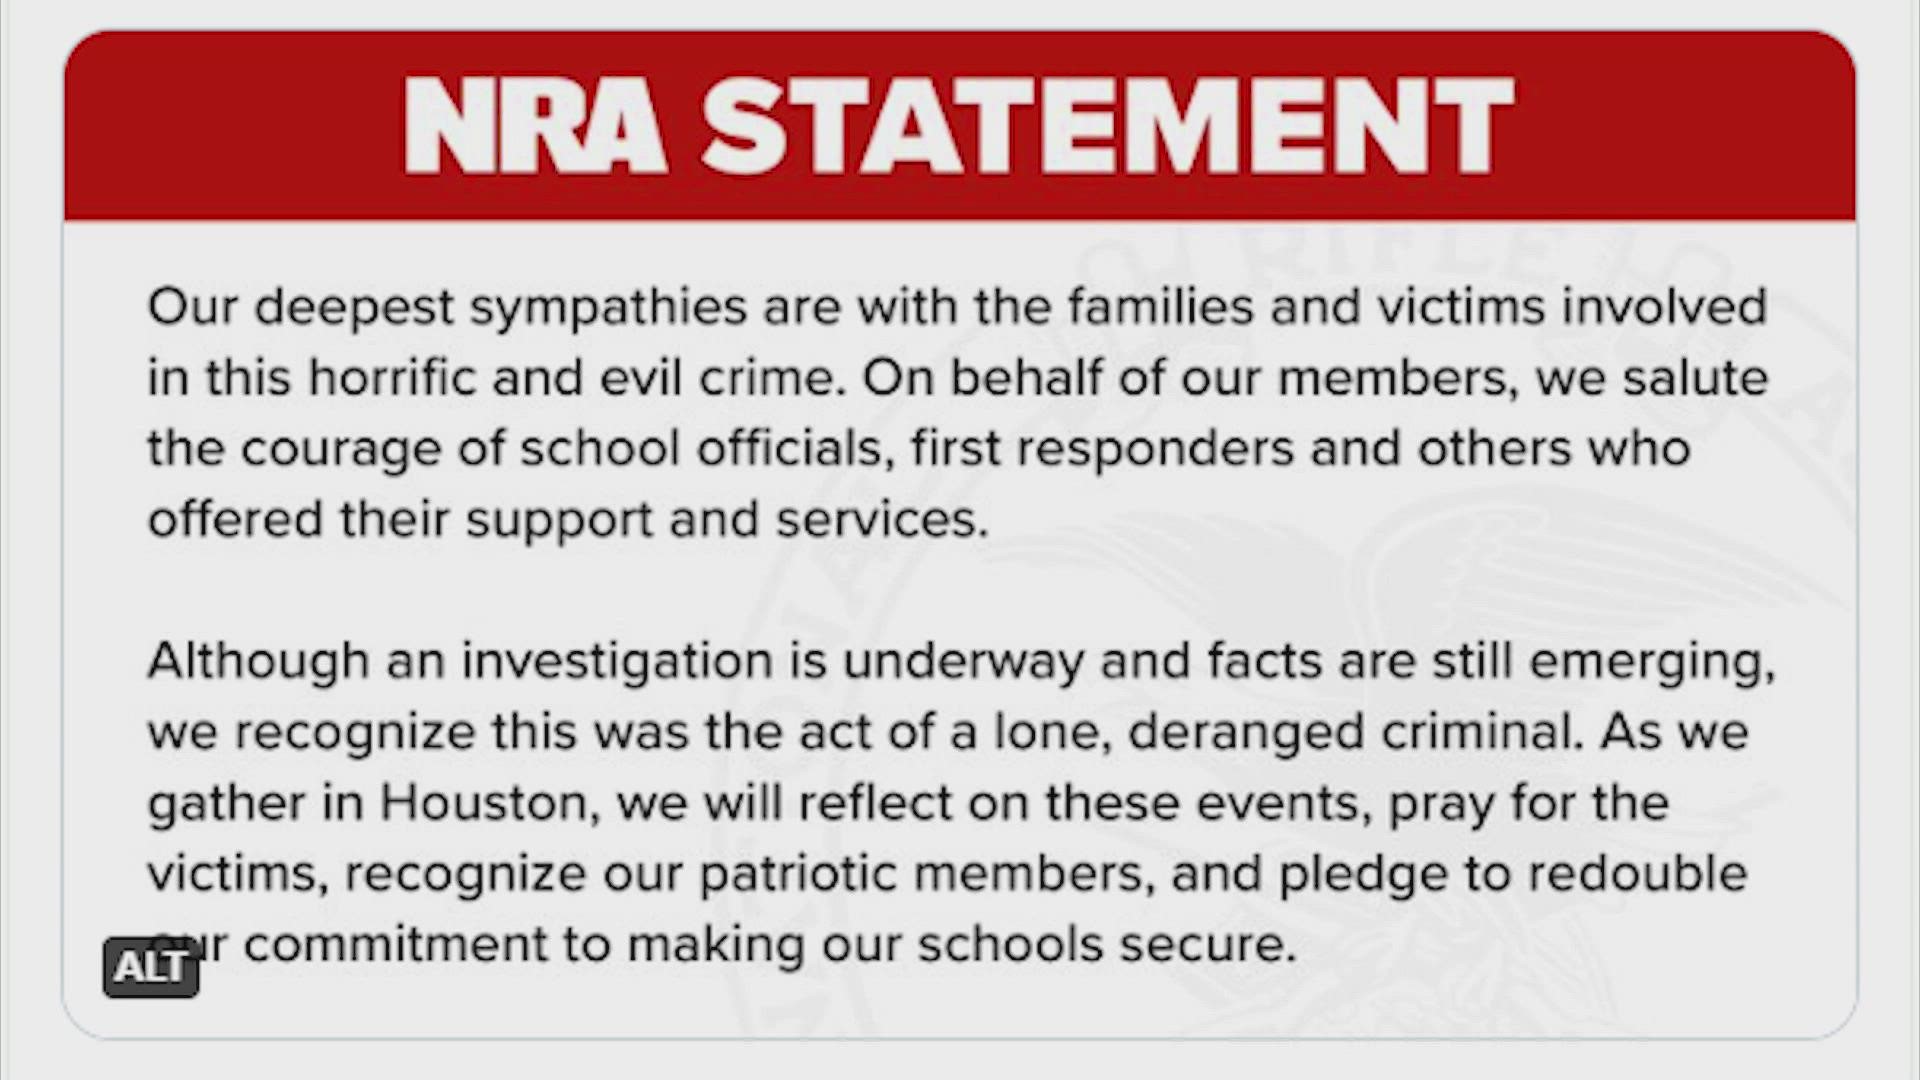 The NRA president sent a letter to Gov. Abbott calling on him to not attend the conference, and instead, take action to prevent the next mass shooting.